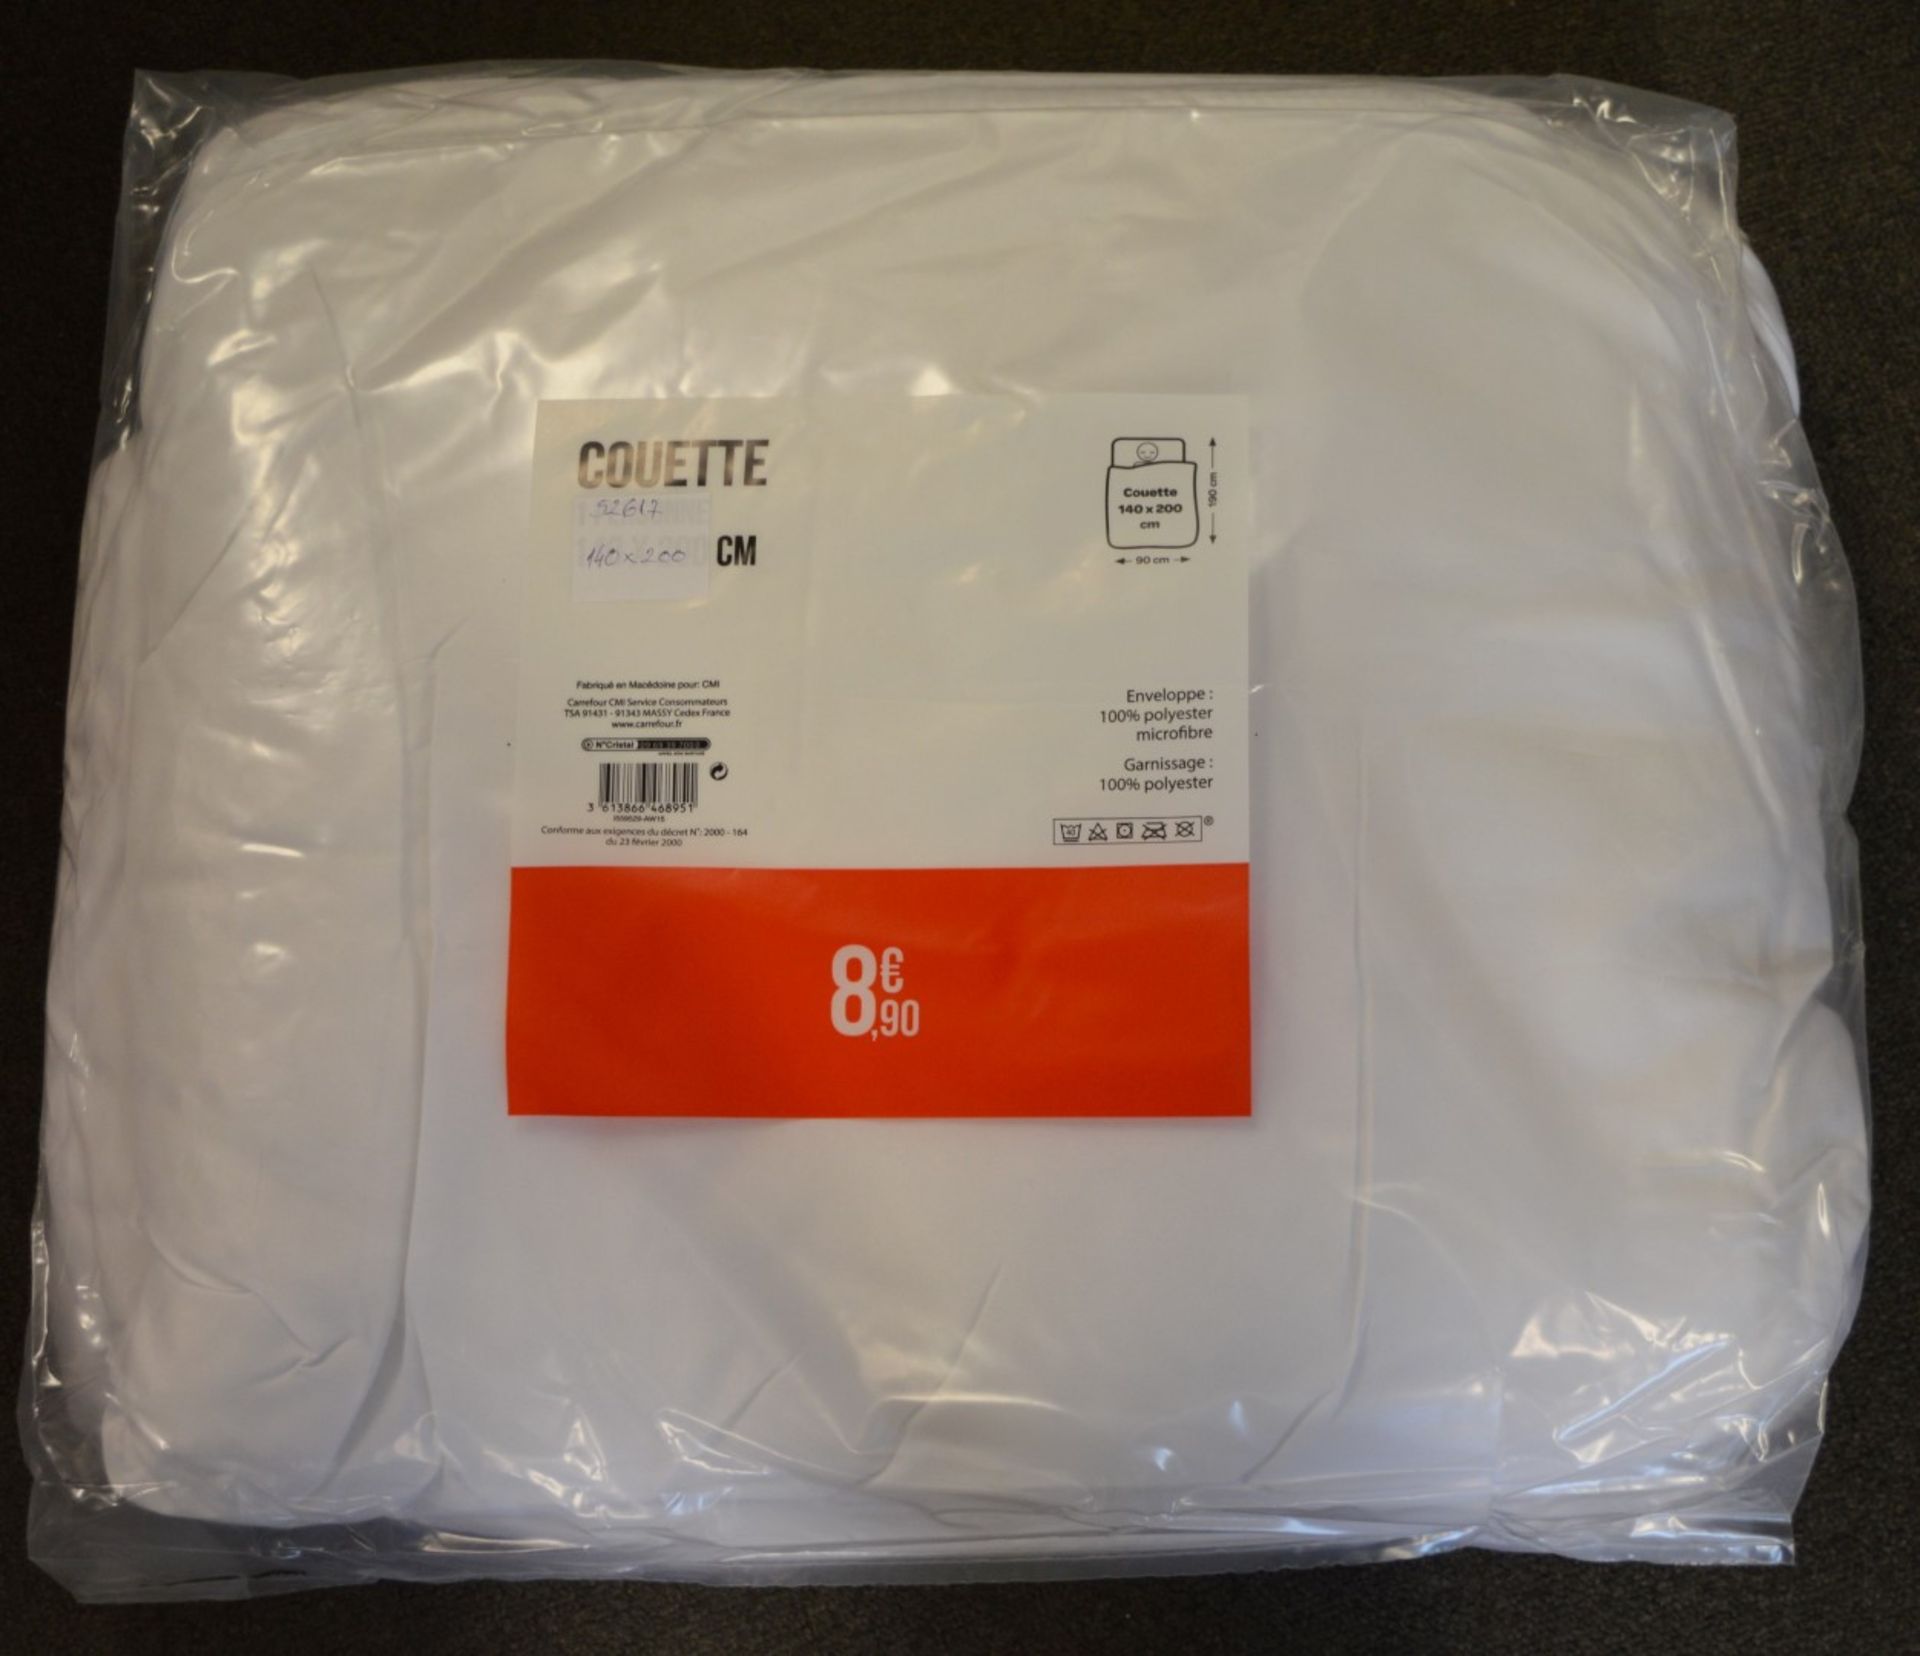 10 x Microfibre Duvets - Brand New Stock - 100% Polyester - CL007 - Location: Altrincham WA14 - - Image 3 of 6